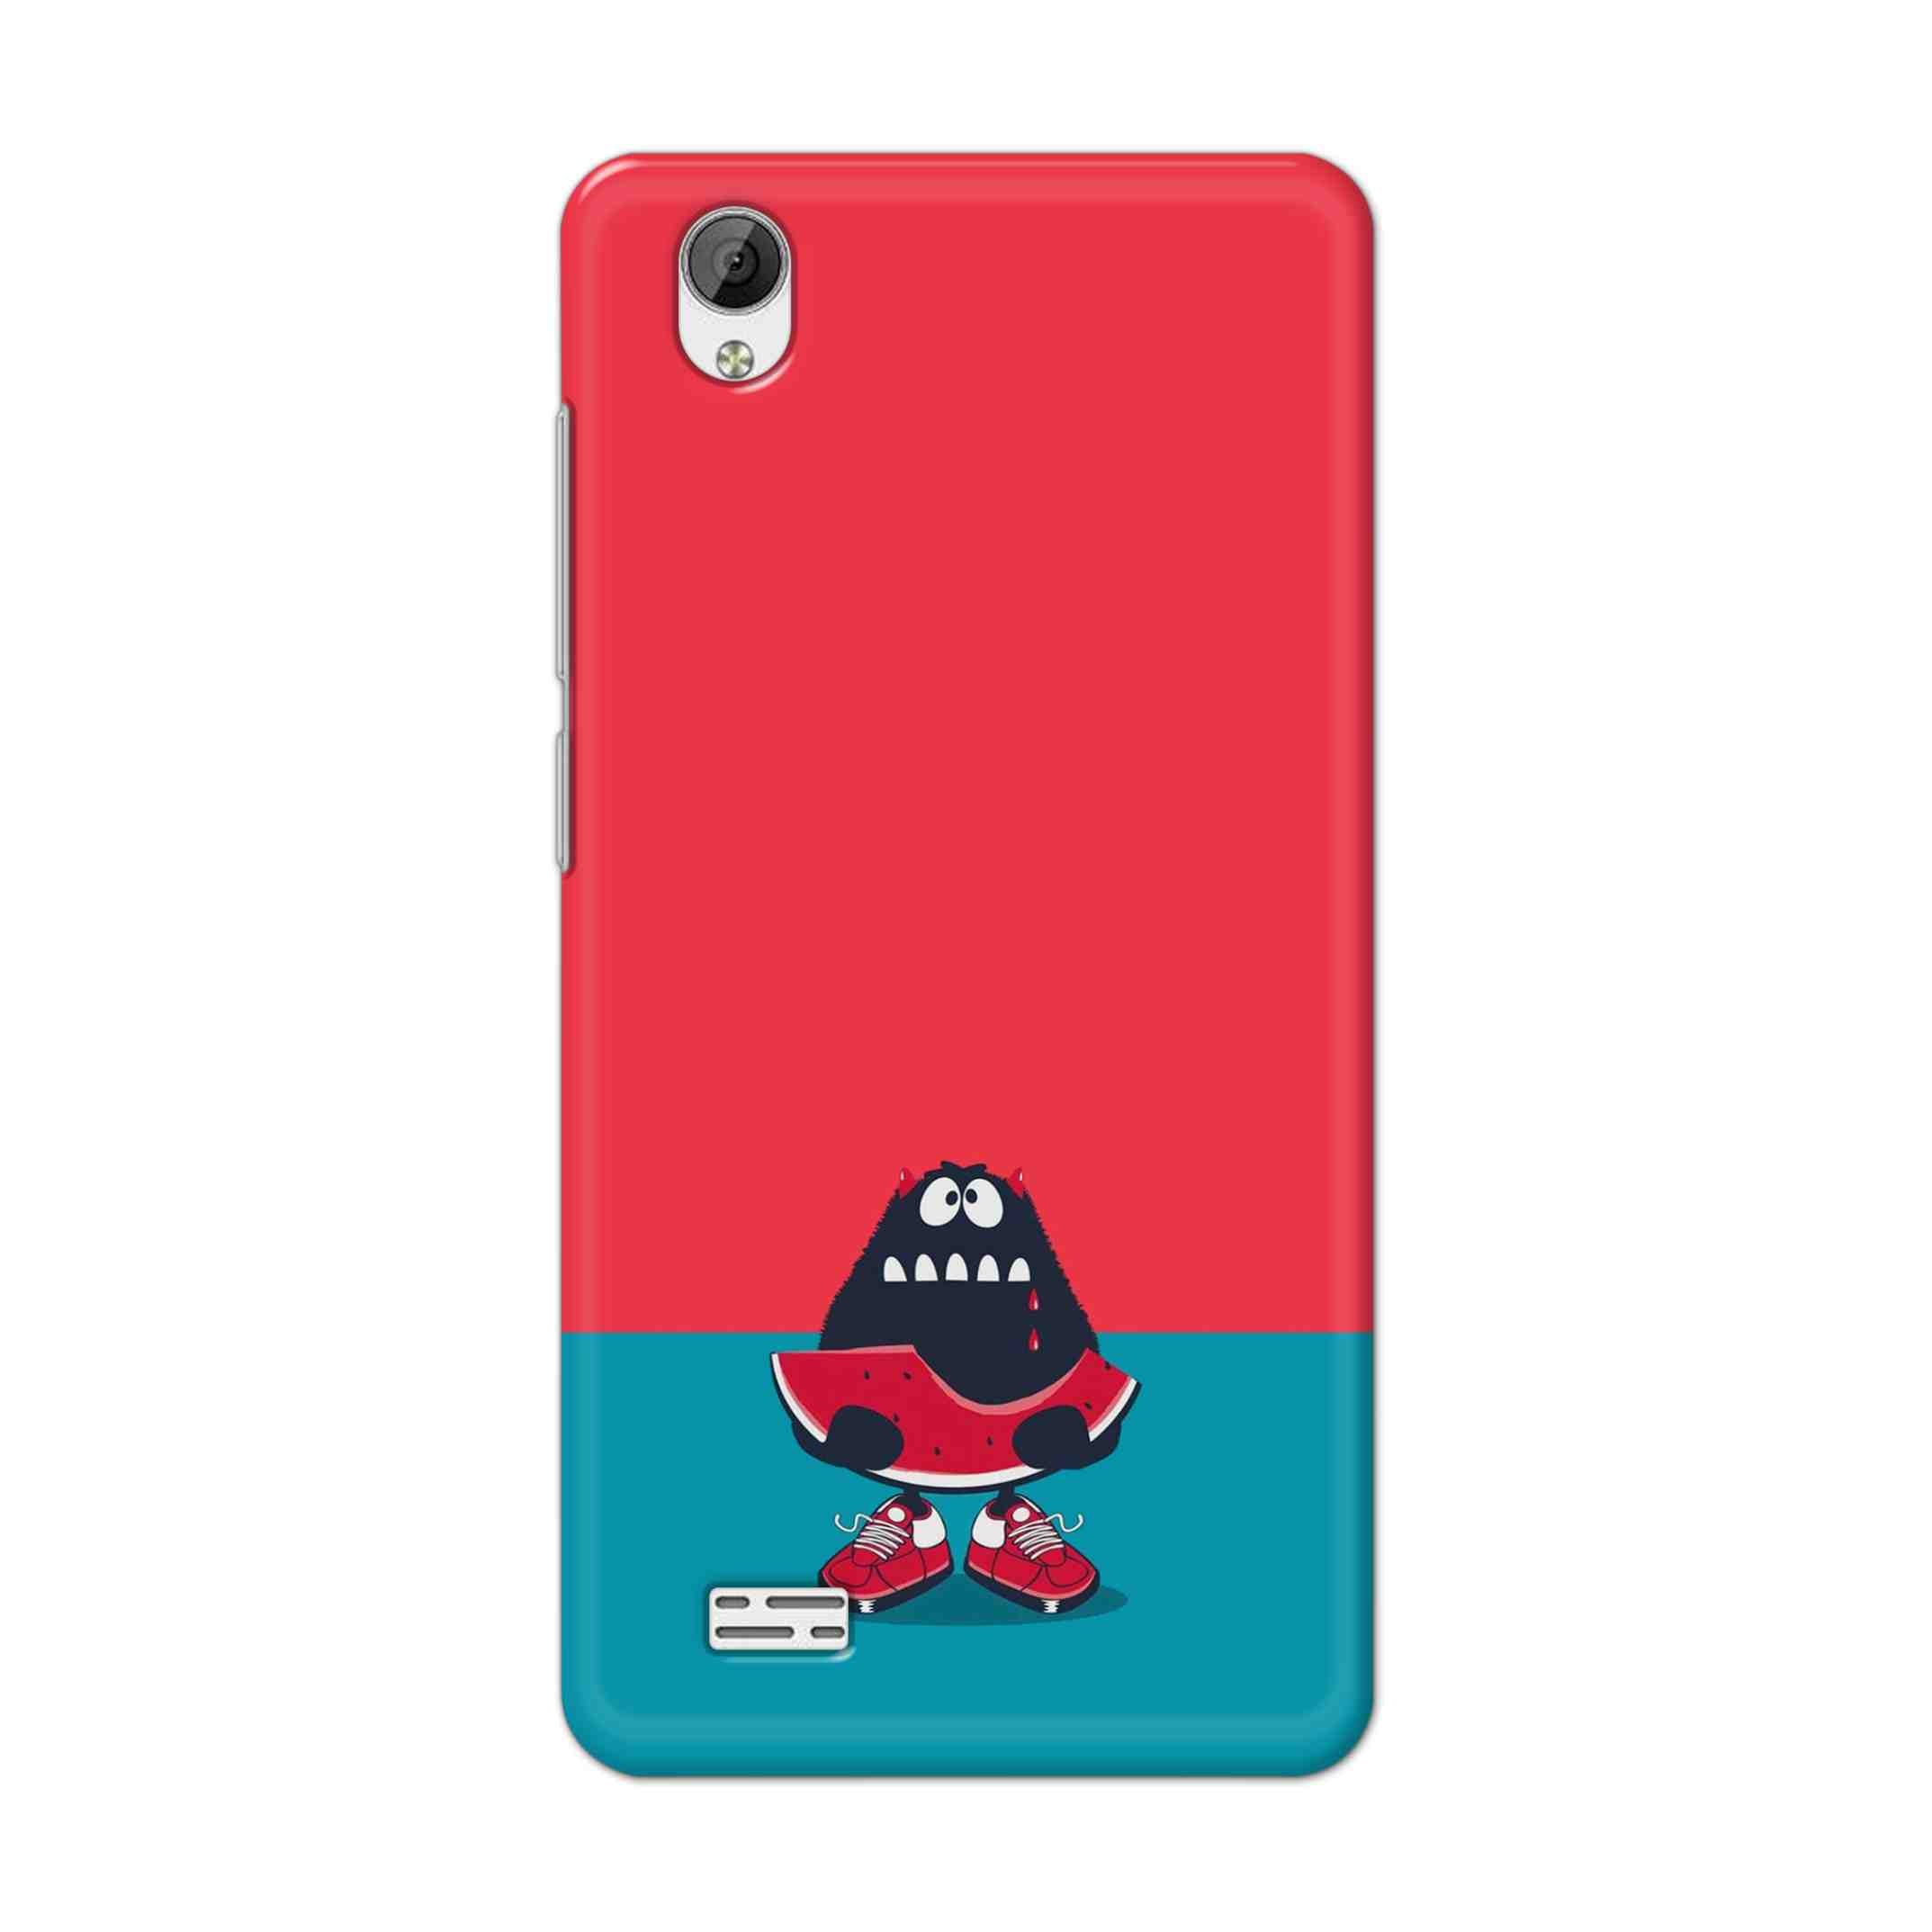 Buy Watermelon Hard Back Mobile Phone Case Cover For Vivo Y31 Online